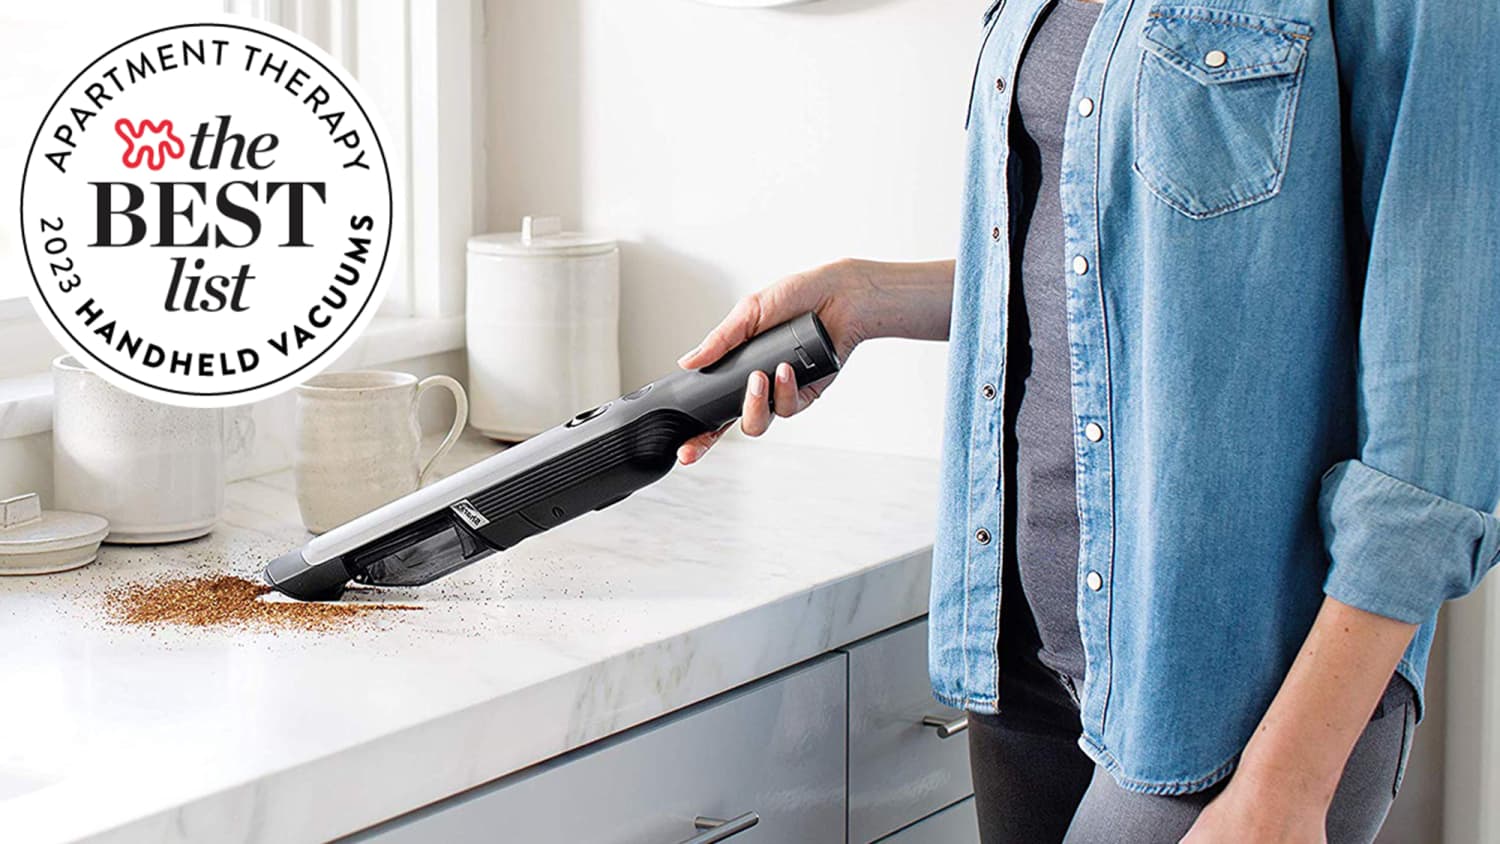 This Handheld Vacuum That's an 'Indispensable Cleaning Companion